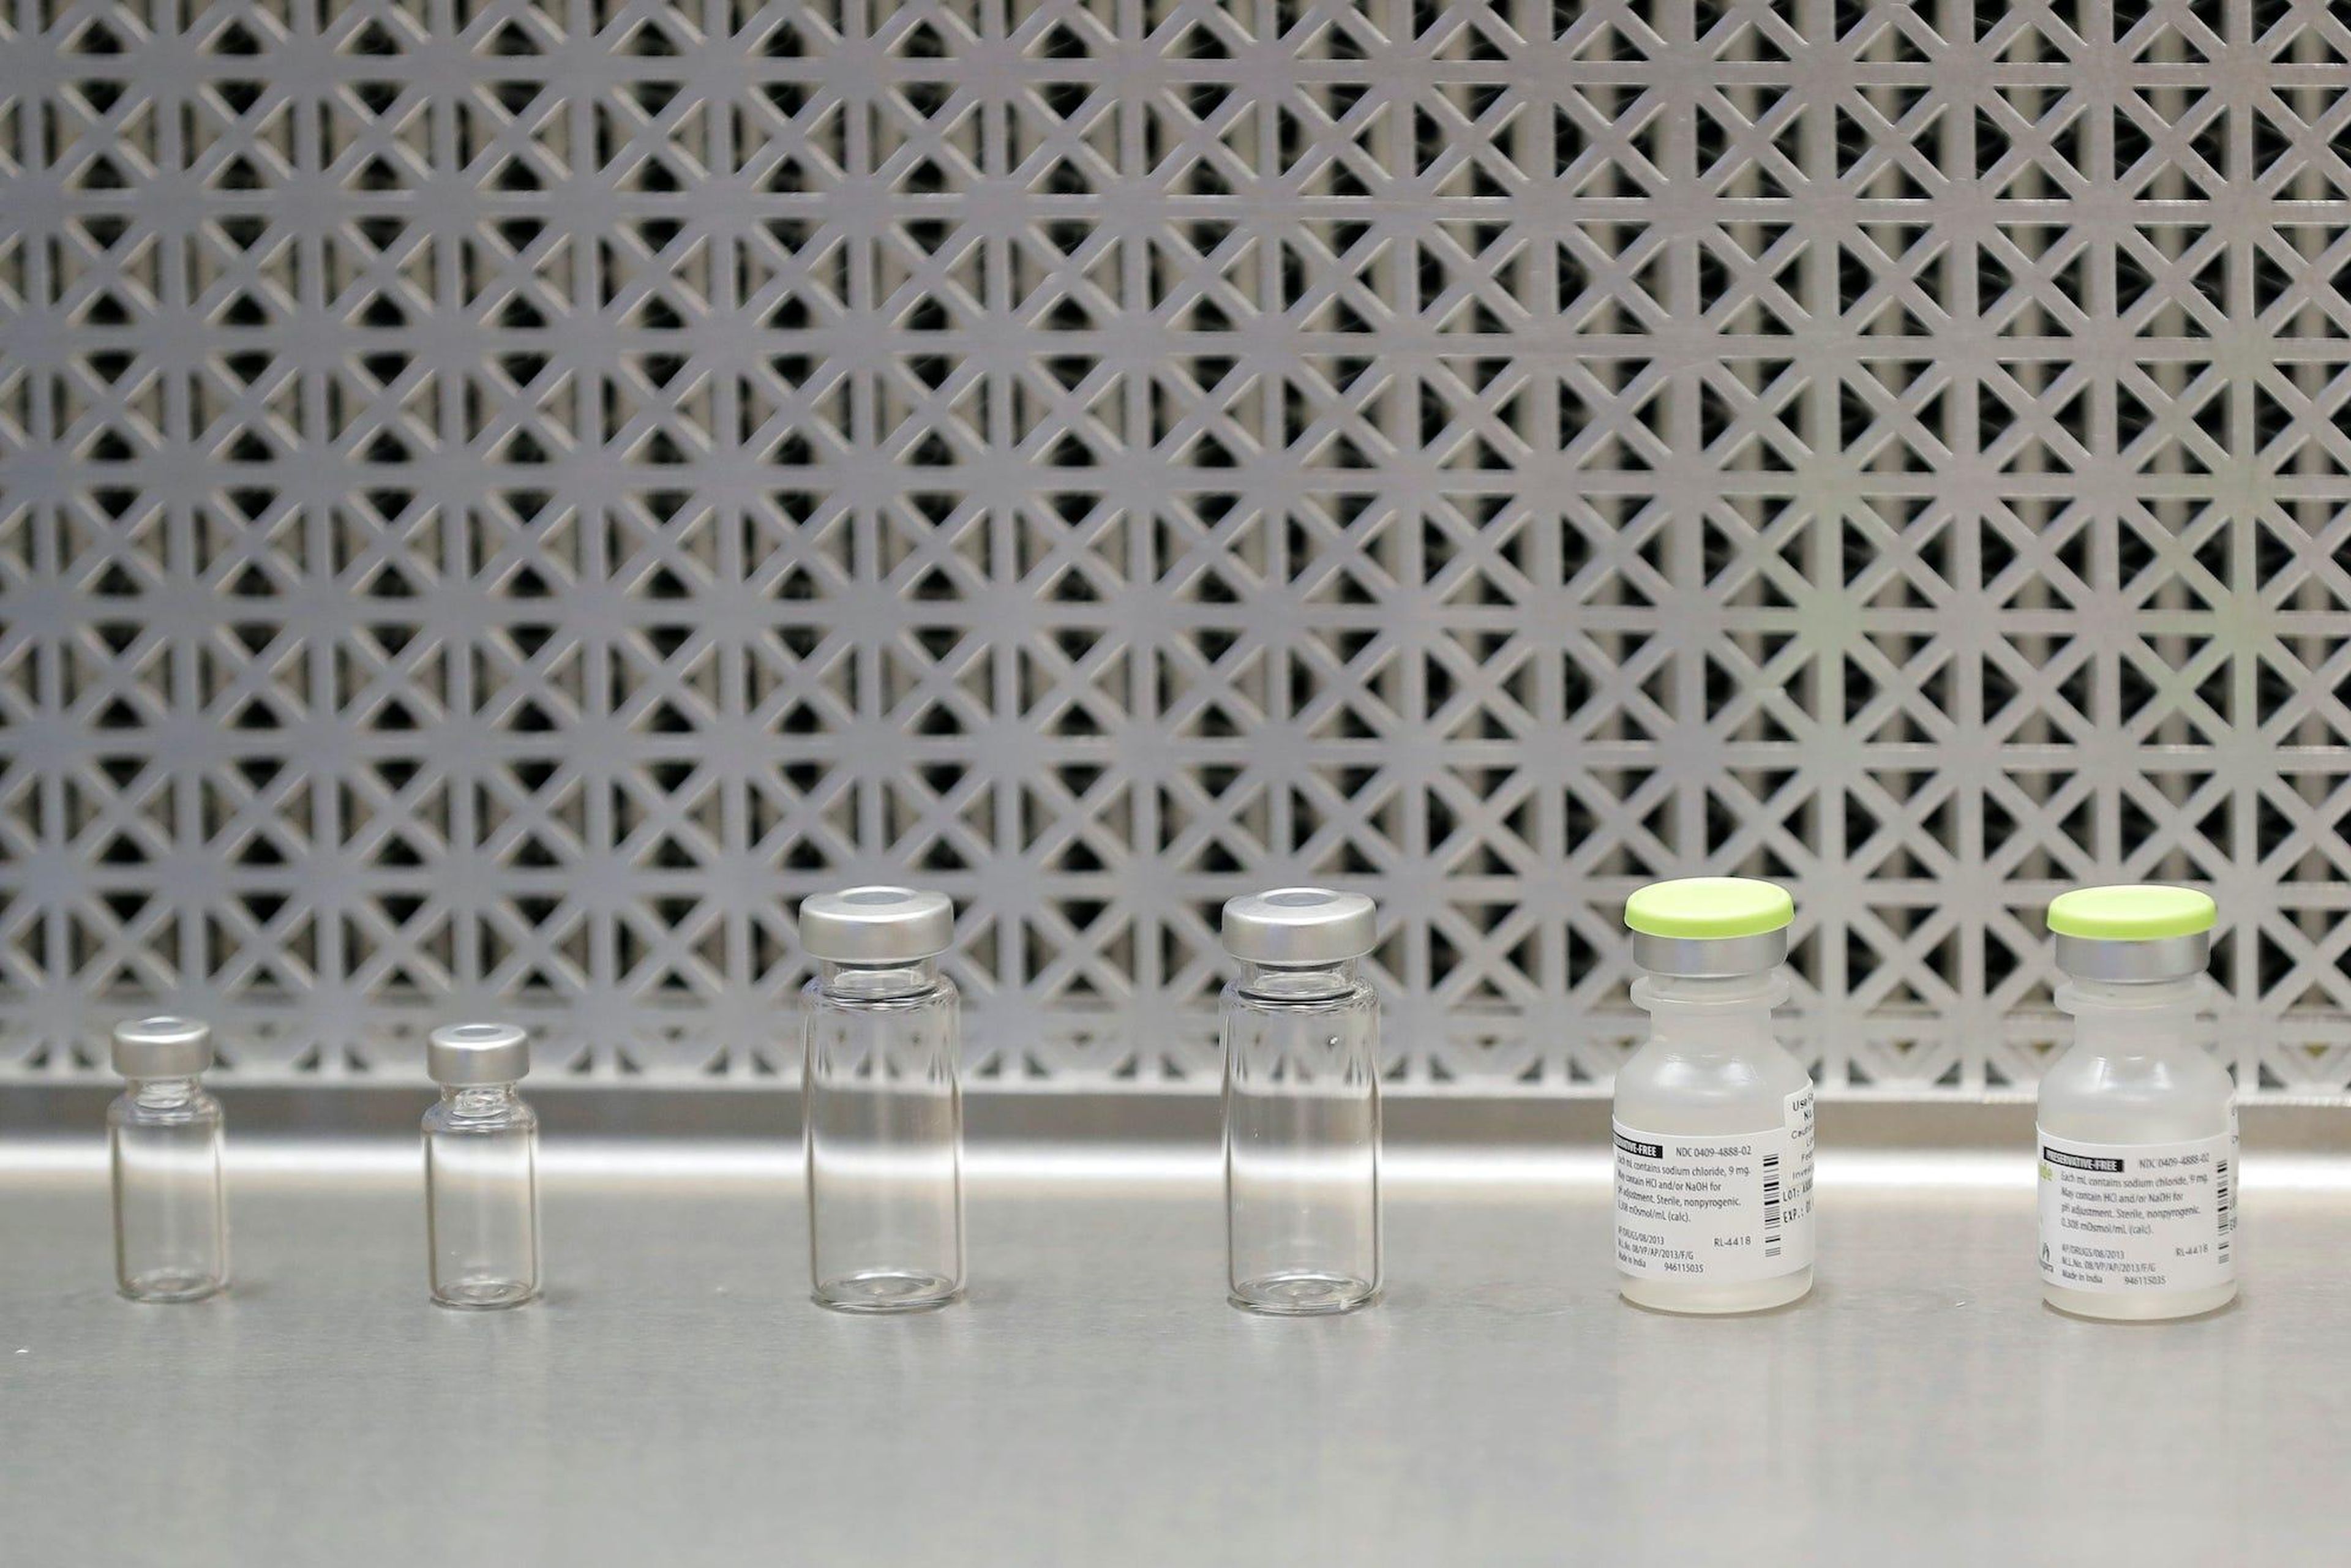 Vials used by pharmacists to prepare syringes used on the first day of a first-stage safety study clinical trial of the potential vaccine for COVID-19.